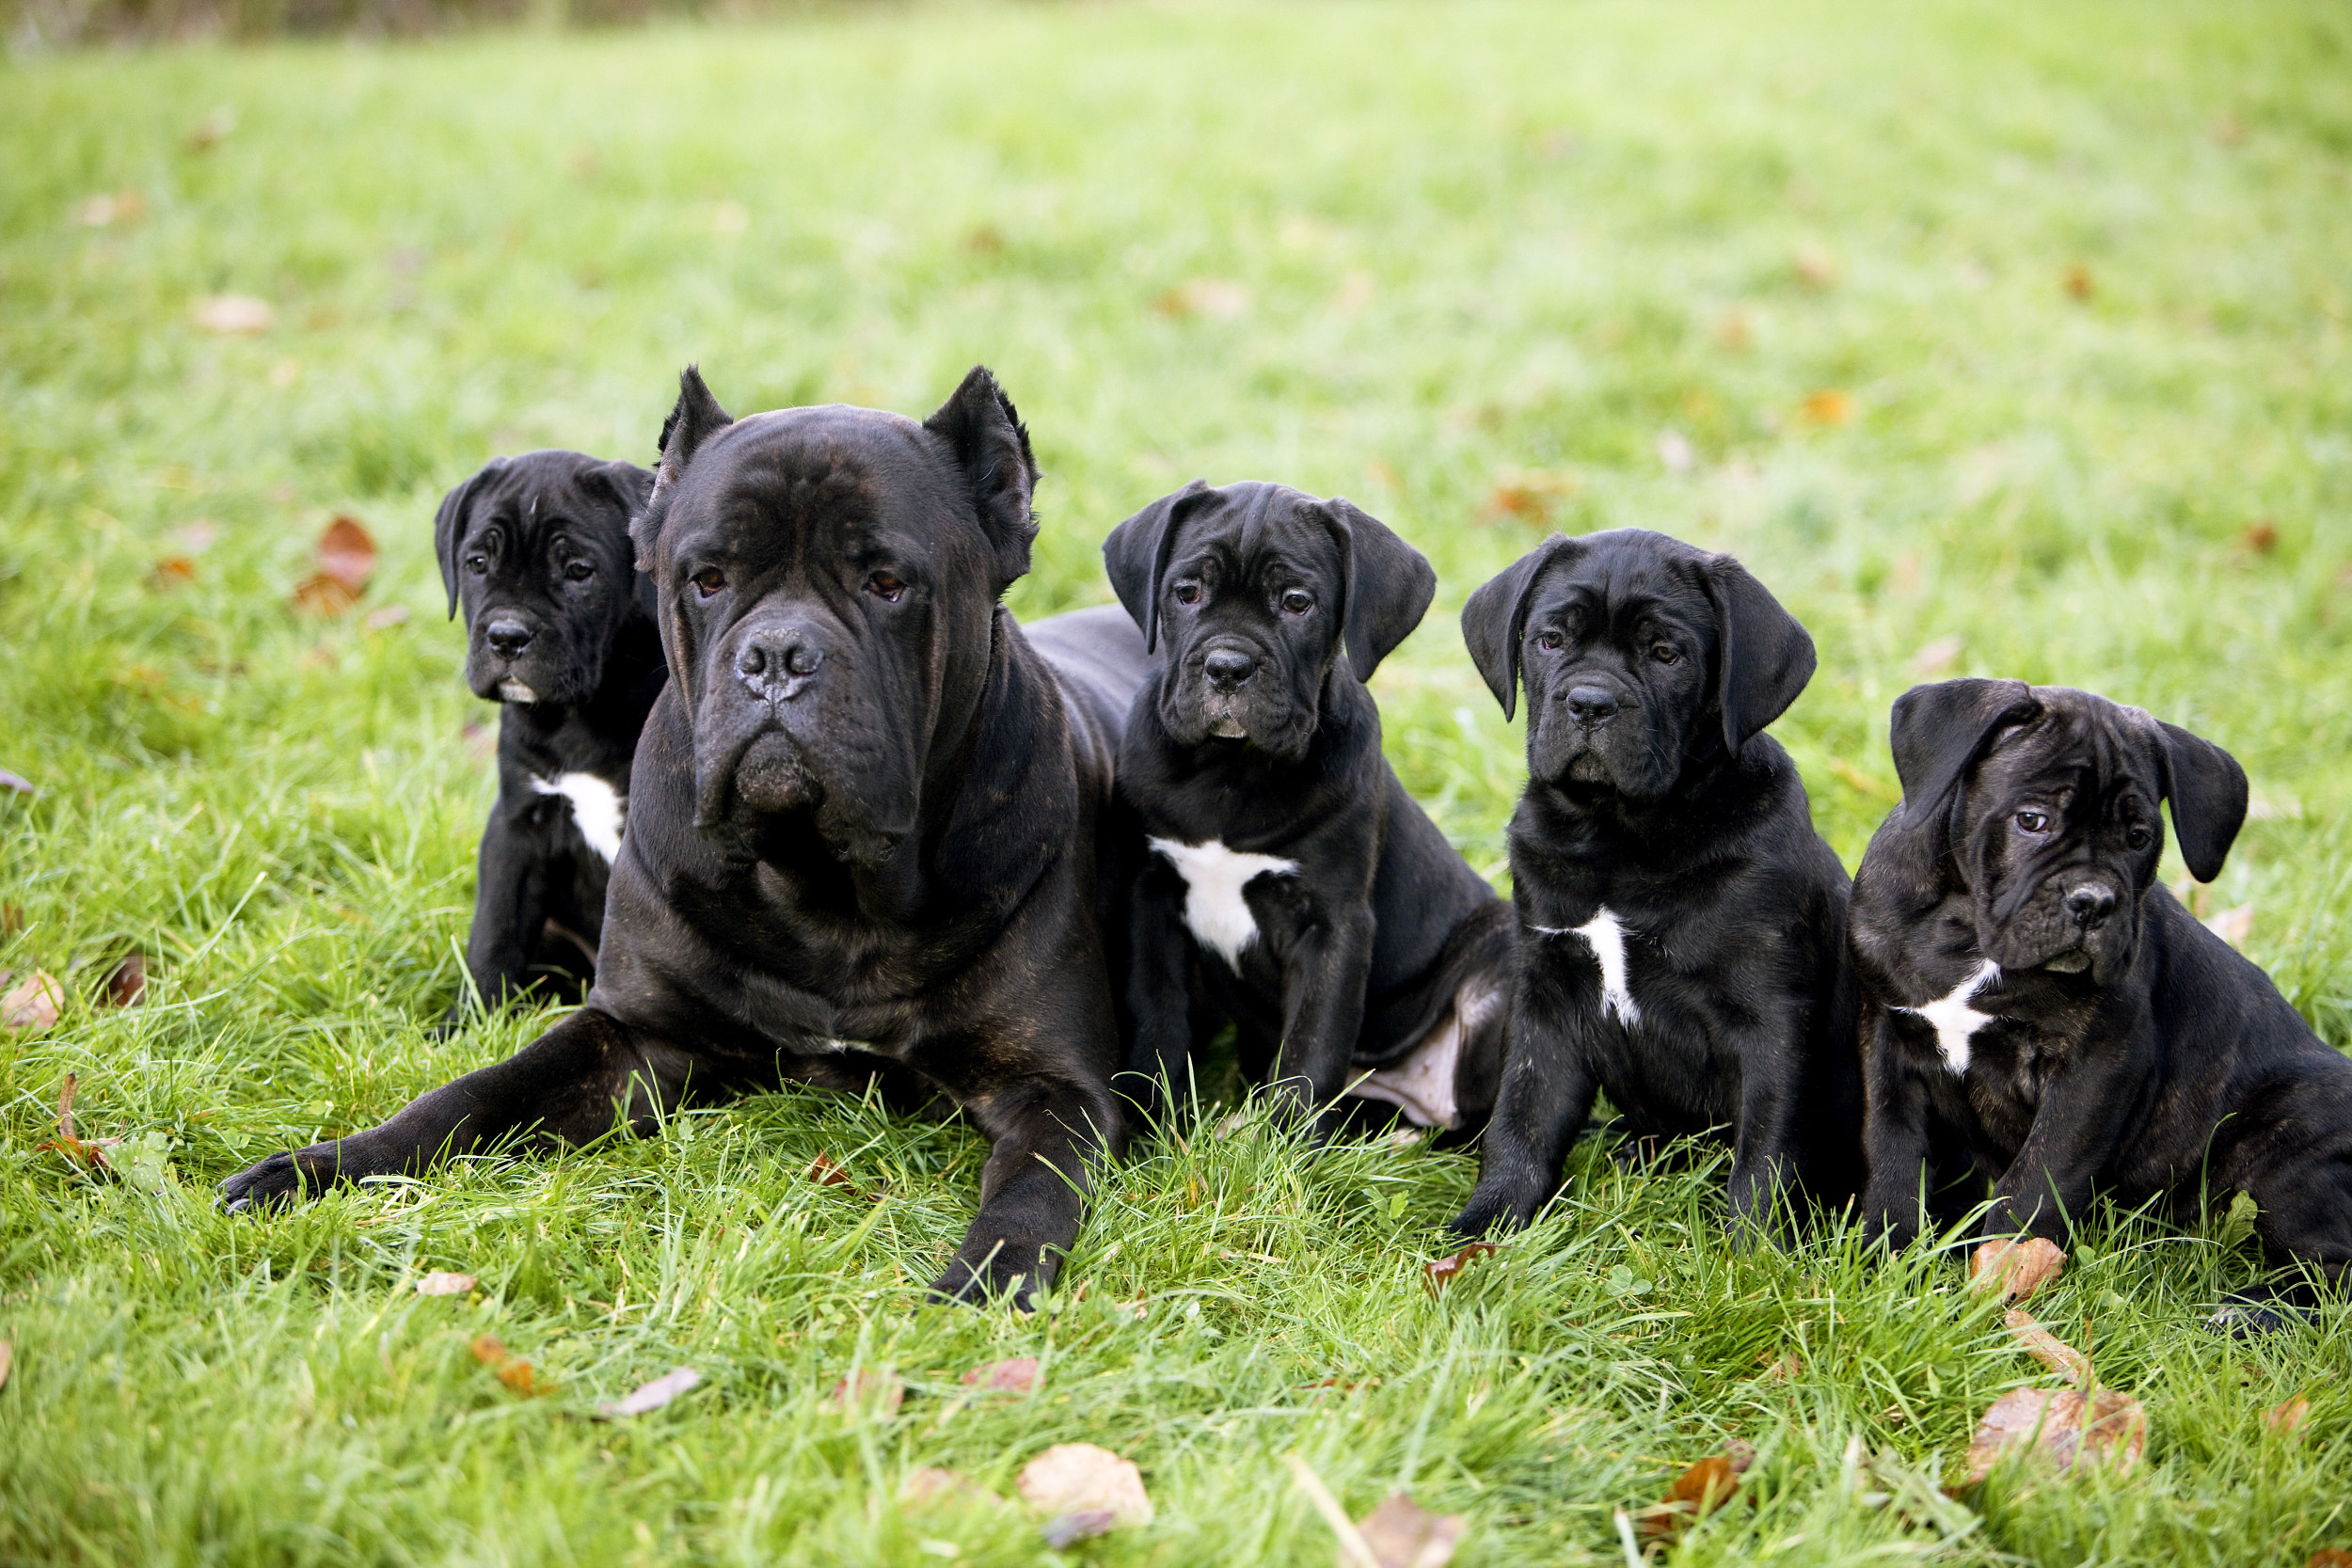 Laughter As Huge Male Cane Corso Unimpressed With Lively Litter Of Puppies